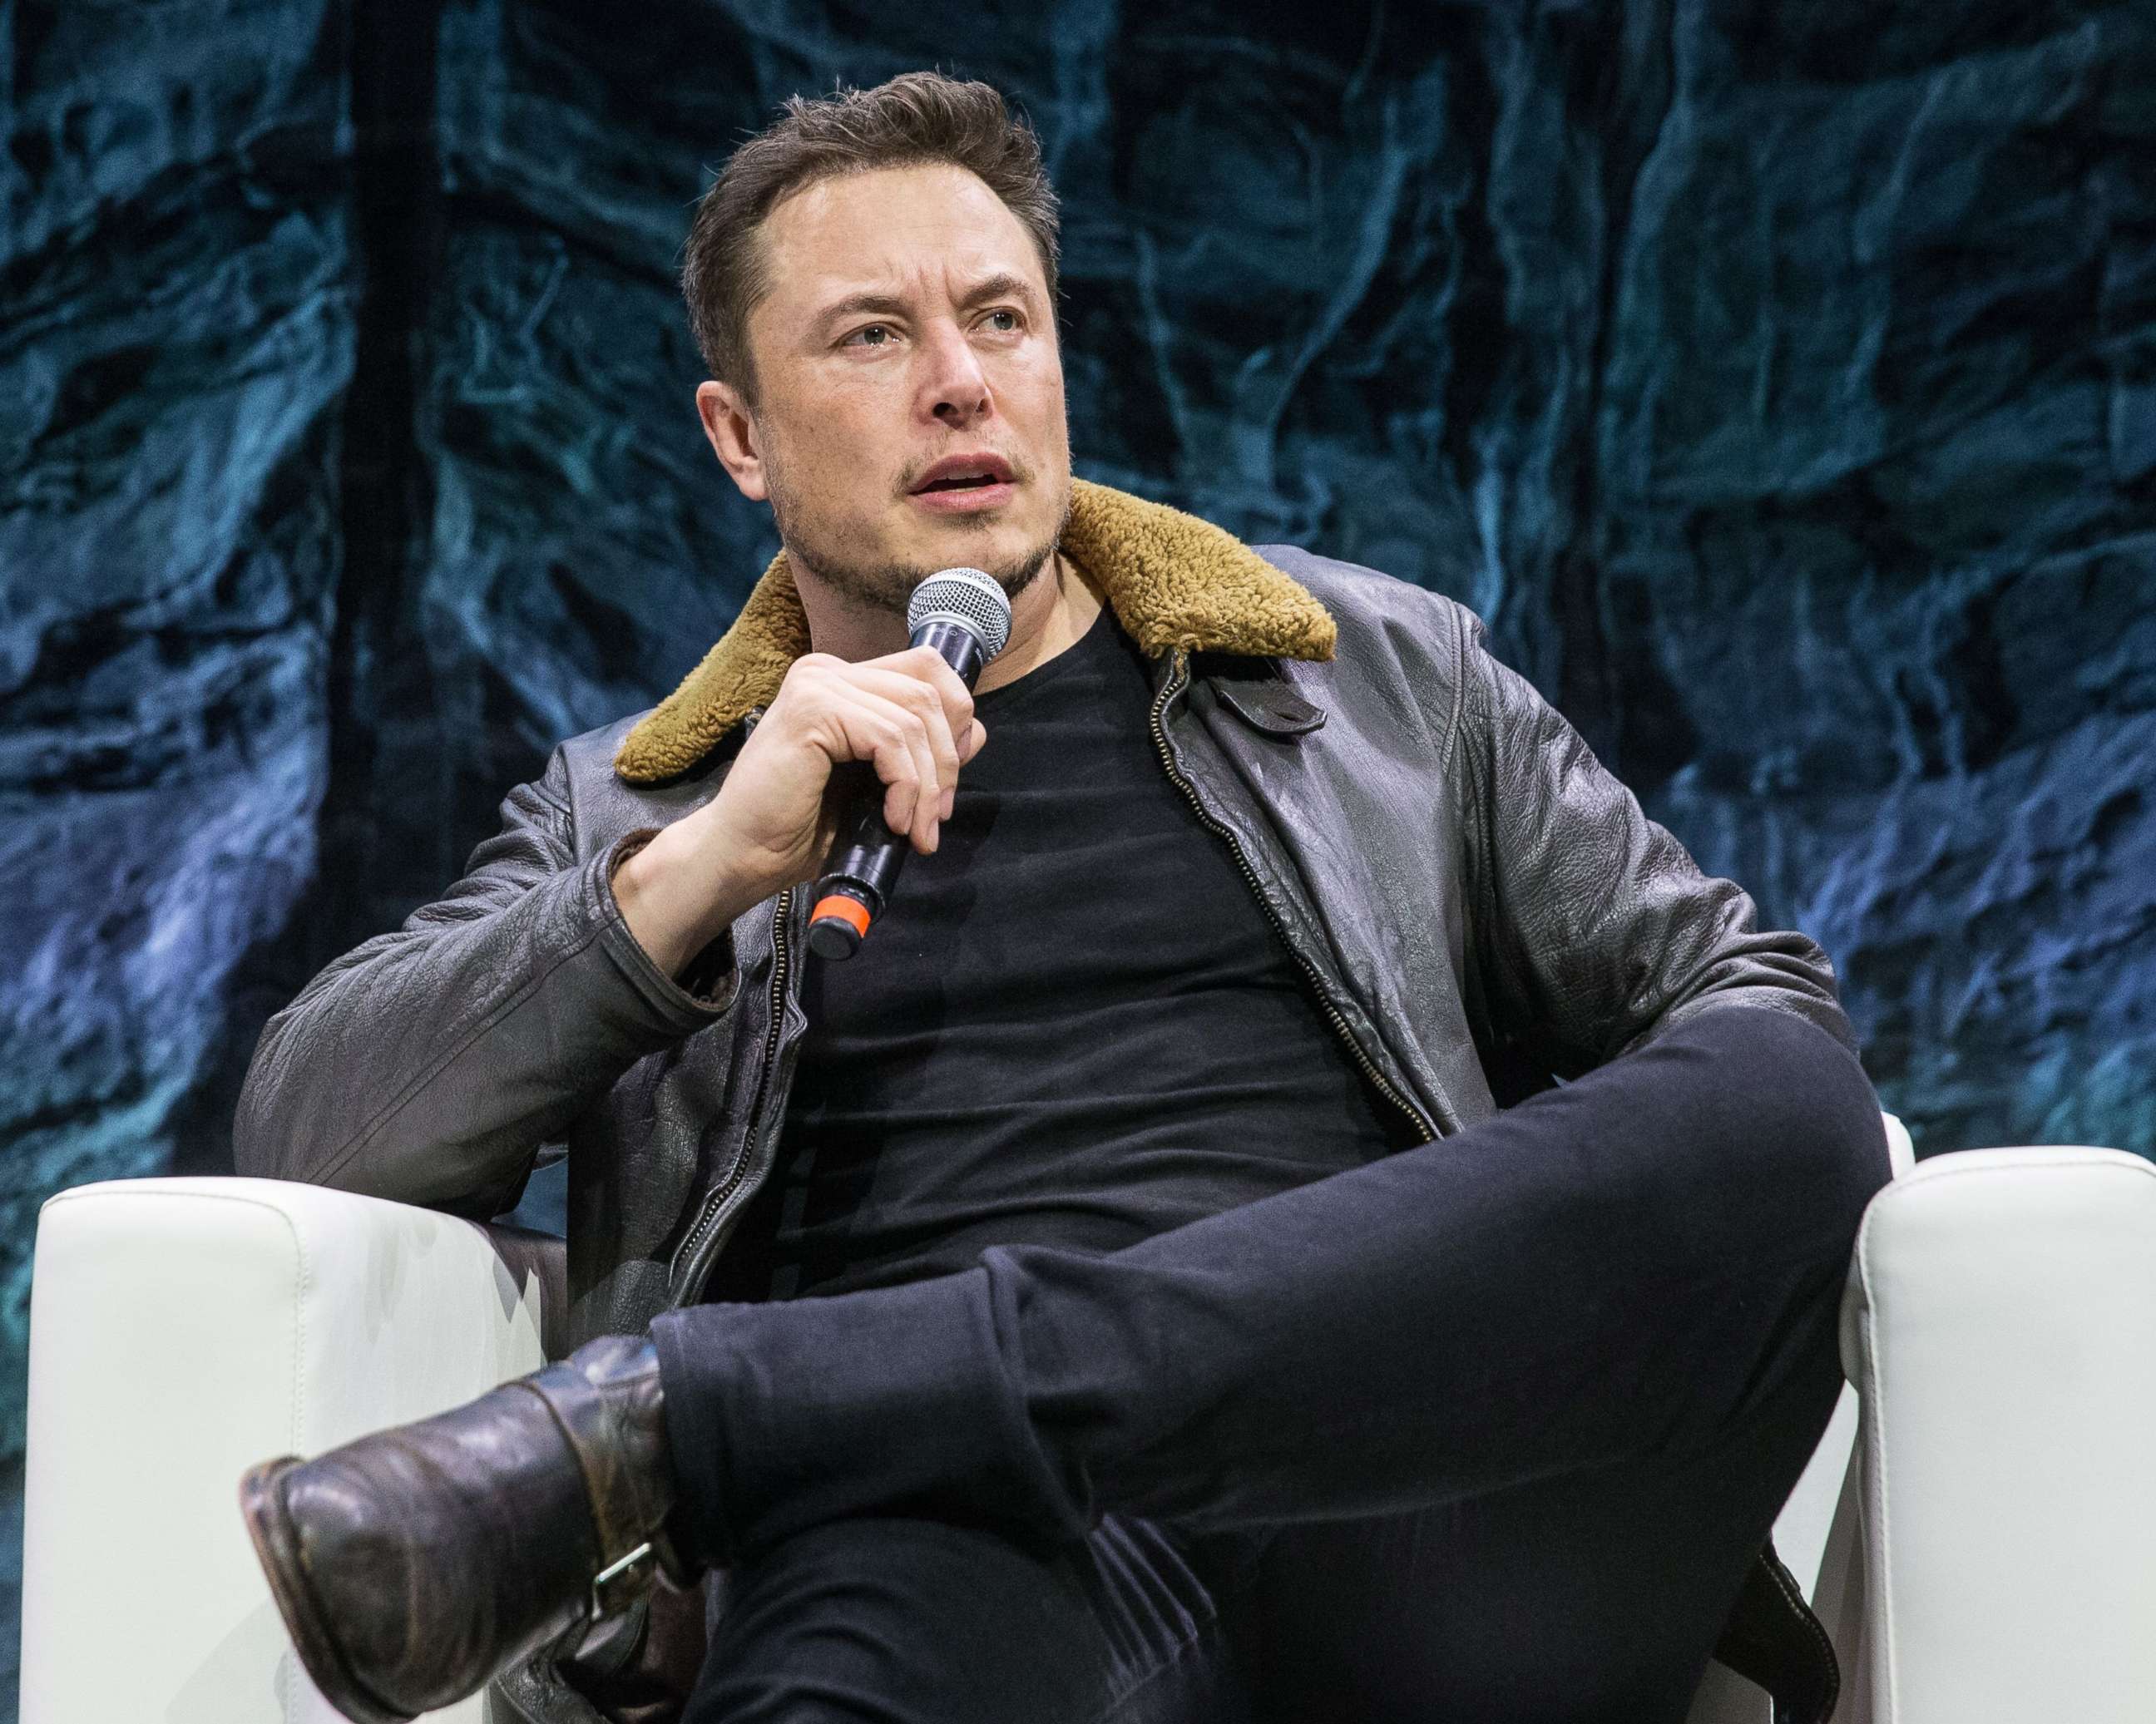 PHOTO: Elon Musk, CEO of SpaceX and Tesla, attends SXSW to answer questions from registrants at ACL live, March 11, 2018, in Austin, Texas.